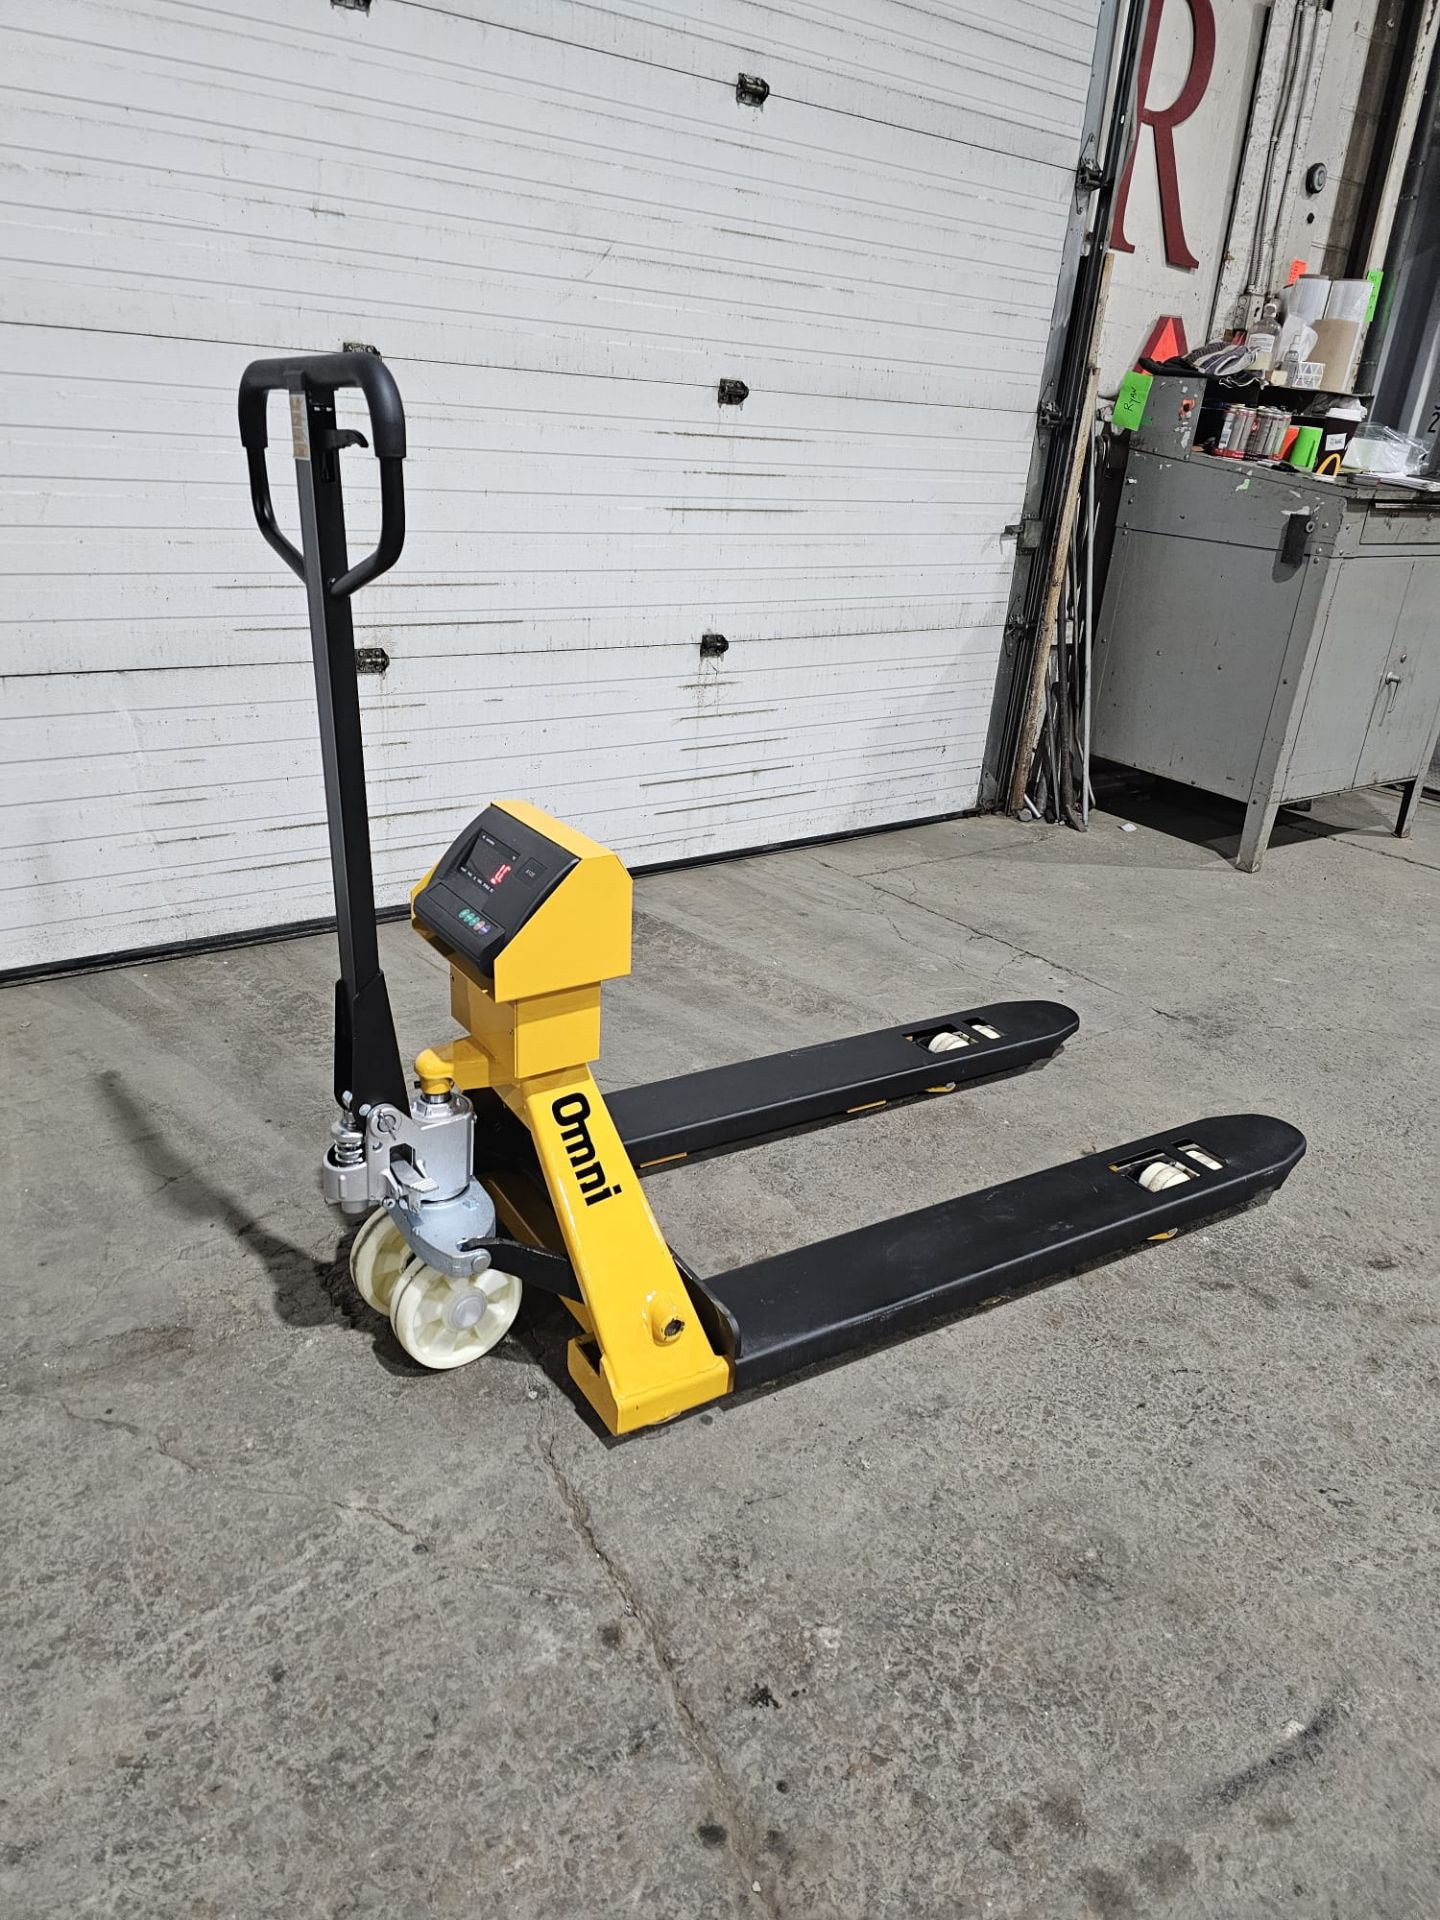 Brand New Omni Pallet Truck Walkie 6,000lbs / 3,000kg capacity with Built On Digital Scale & Charger